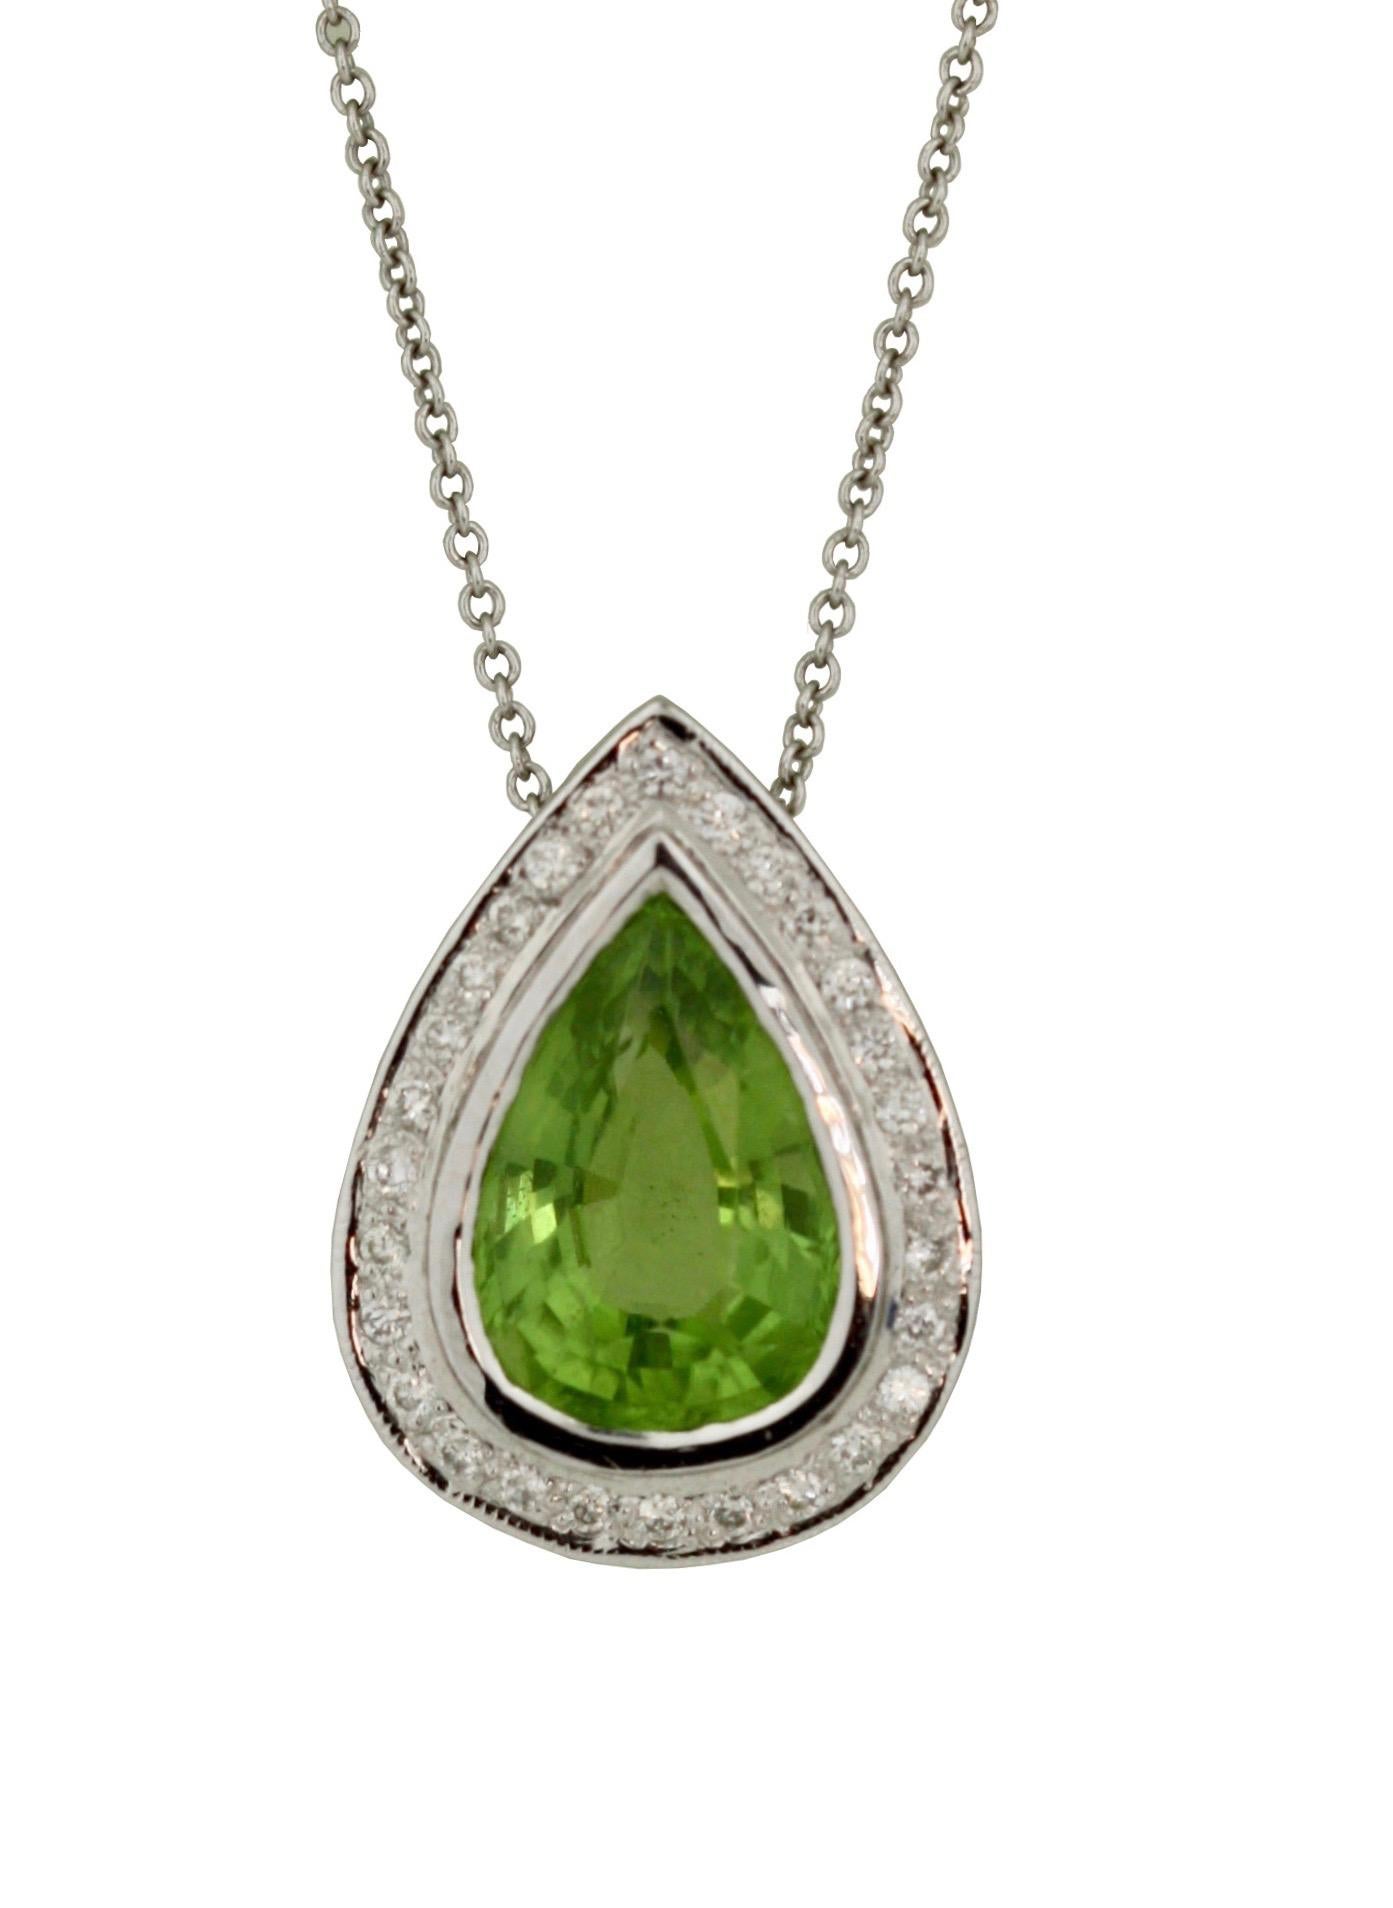 18kt White Gold Peridot and Diamond Pendant, 
Centered with a pear shaped step-cut peridot surrounded by diamonds, together with a 14kt white gold sixteen inch chain,
Peridot approx. 3.10 cts, Diamonds approx .50 cts
5.7 grams (gross).